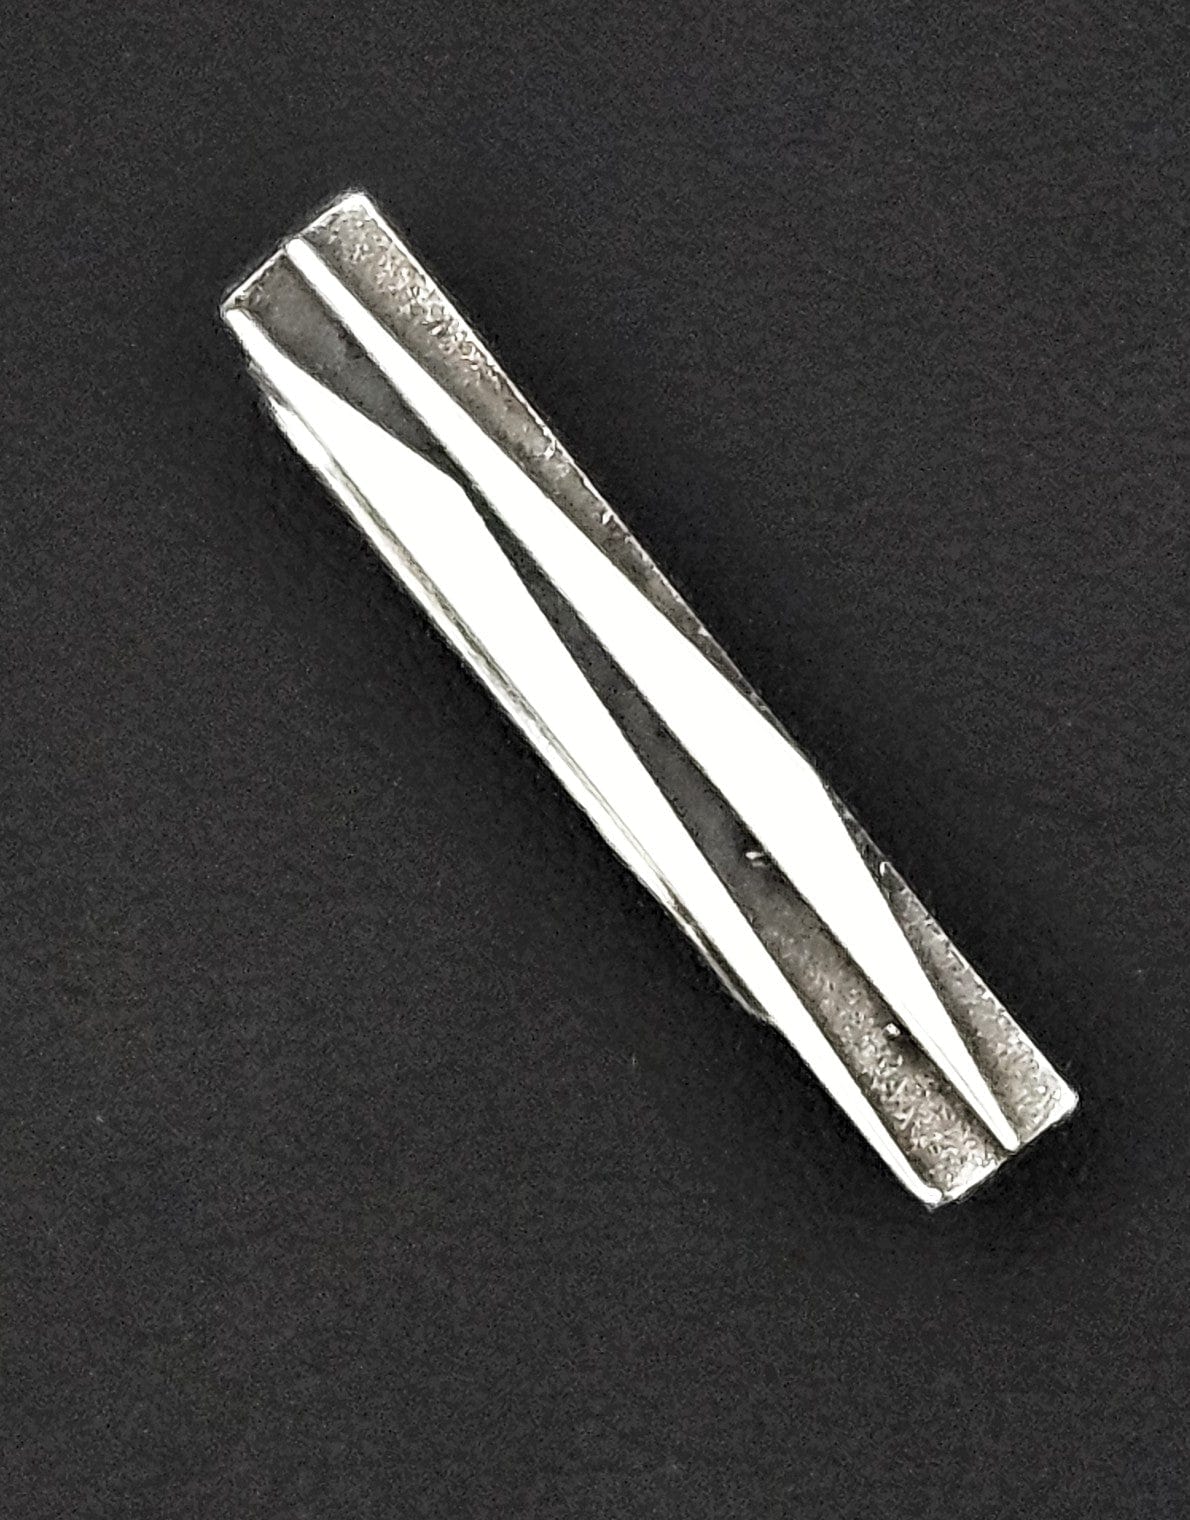 Harold Fithian Jewelry Superb Harold Fithian Sterling Abstract Modernist Money Tie Clip 1950/60s Rare